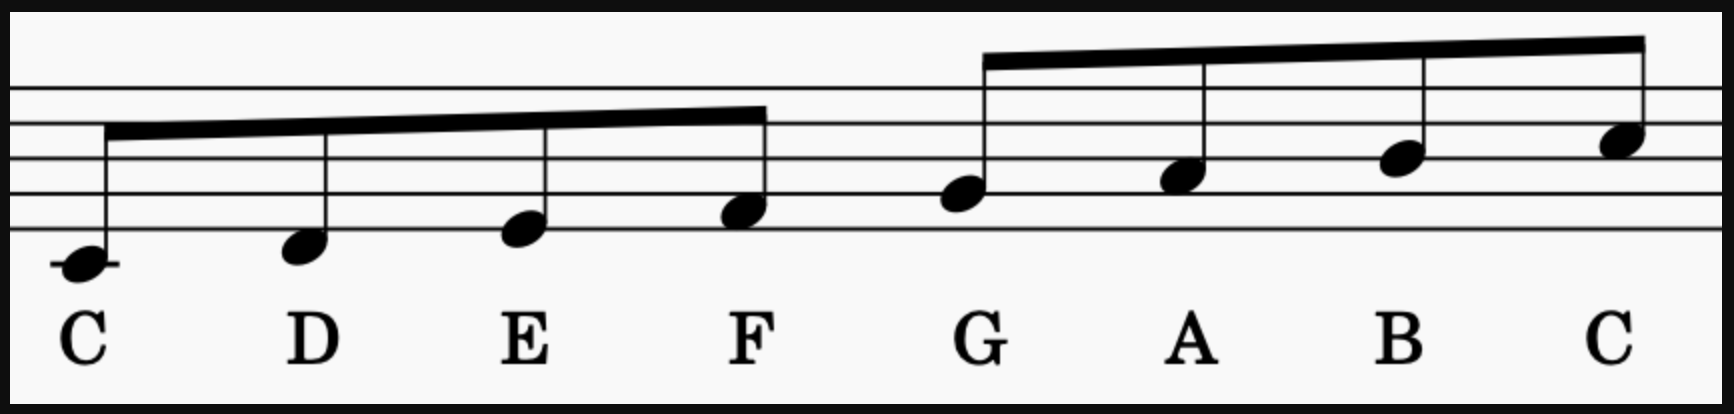 C major scale, or C Ionian